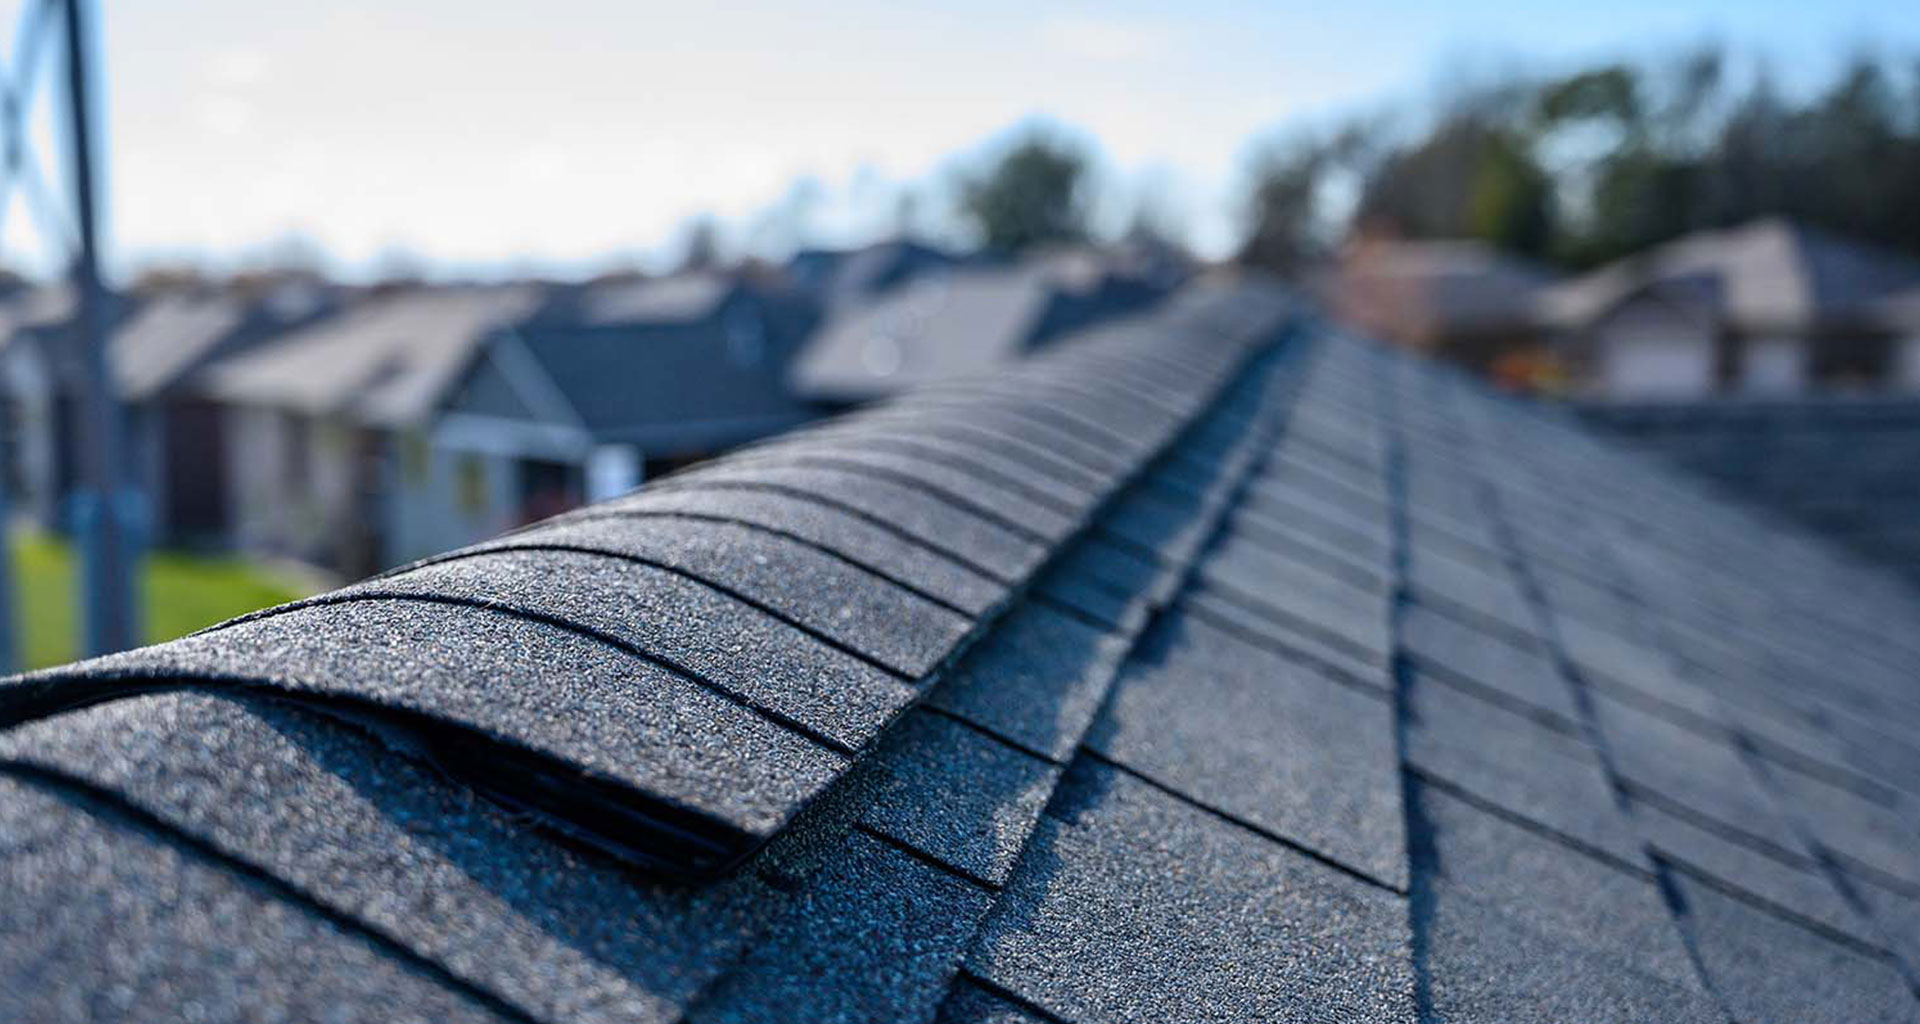 Residential Roofing in Texas